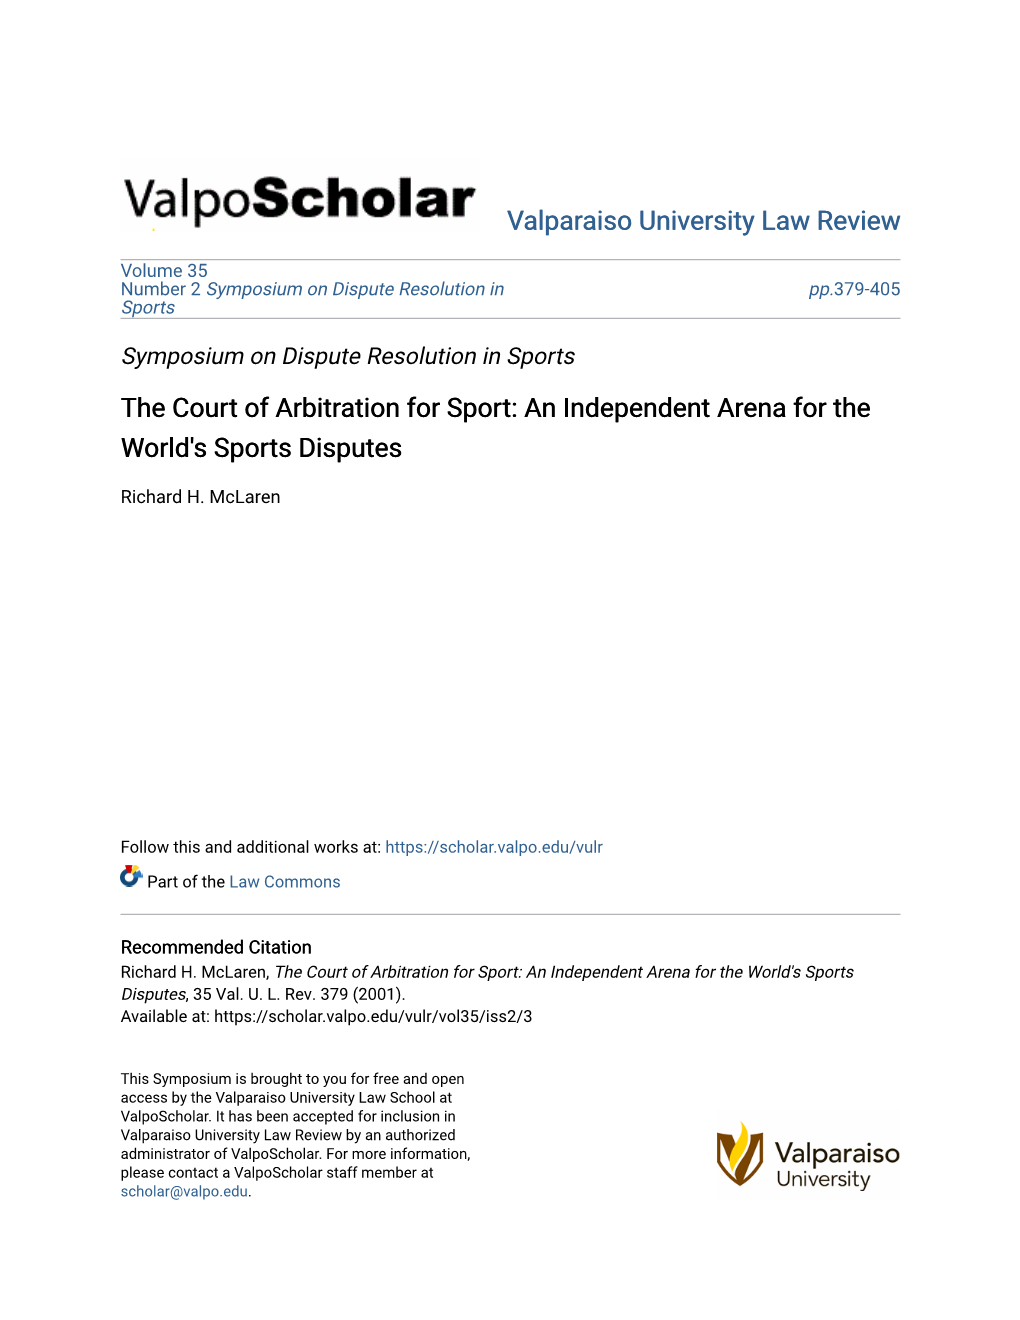 The Court of Arbitration for Sport: an Independent Arena for the World's Sports Disputes